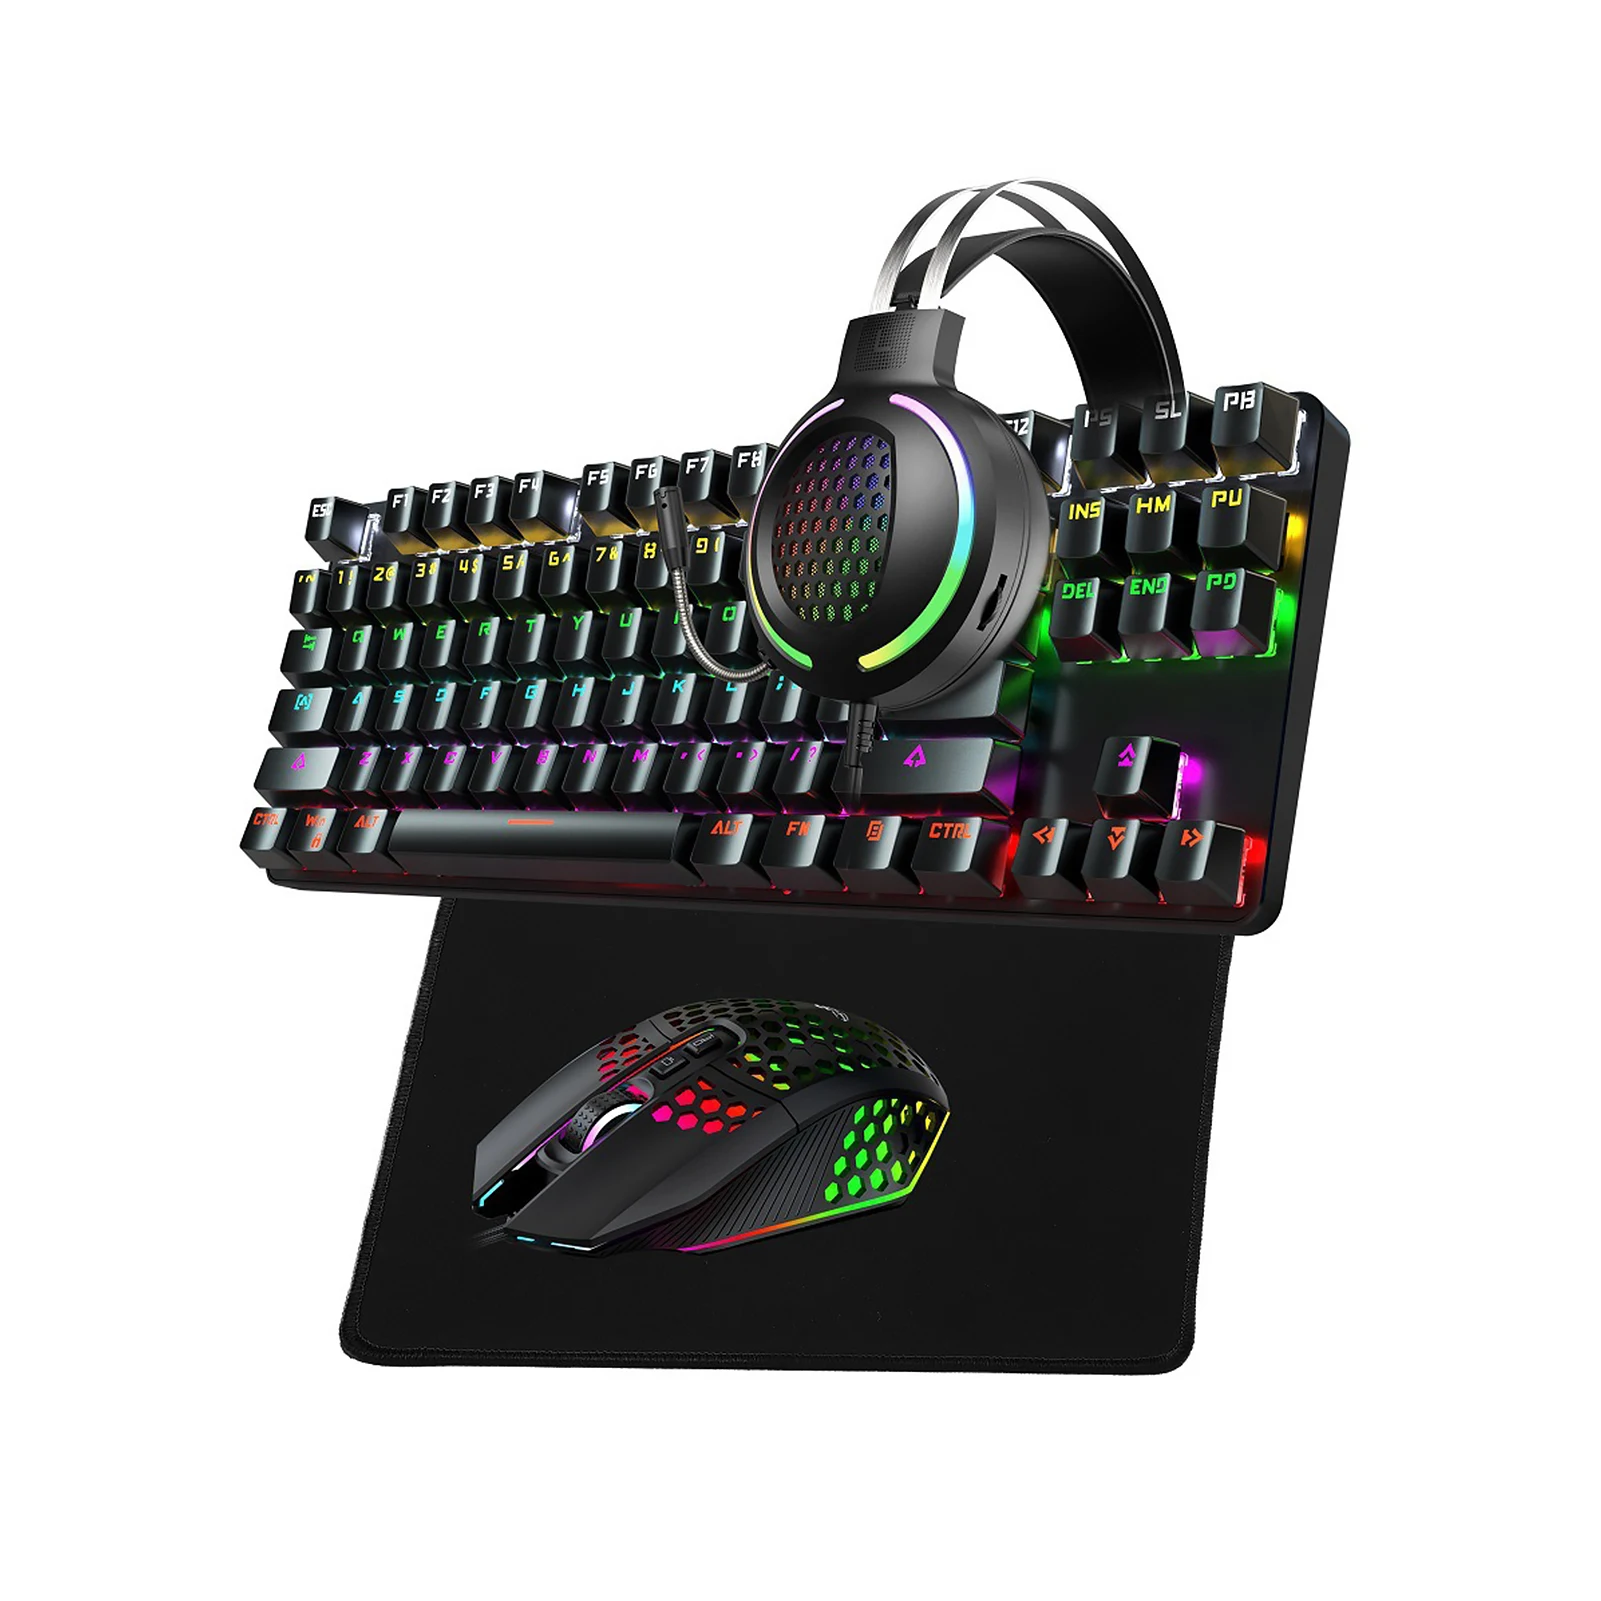 

USB Wired Combo Gaming Keyboard With Mouse Headphone Pad Gift Mechanical Office Mute RGB Backlit PBT PC 87 Keys